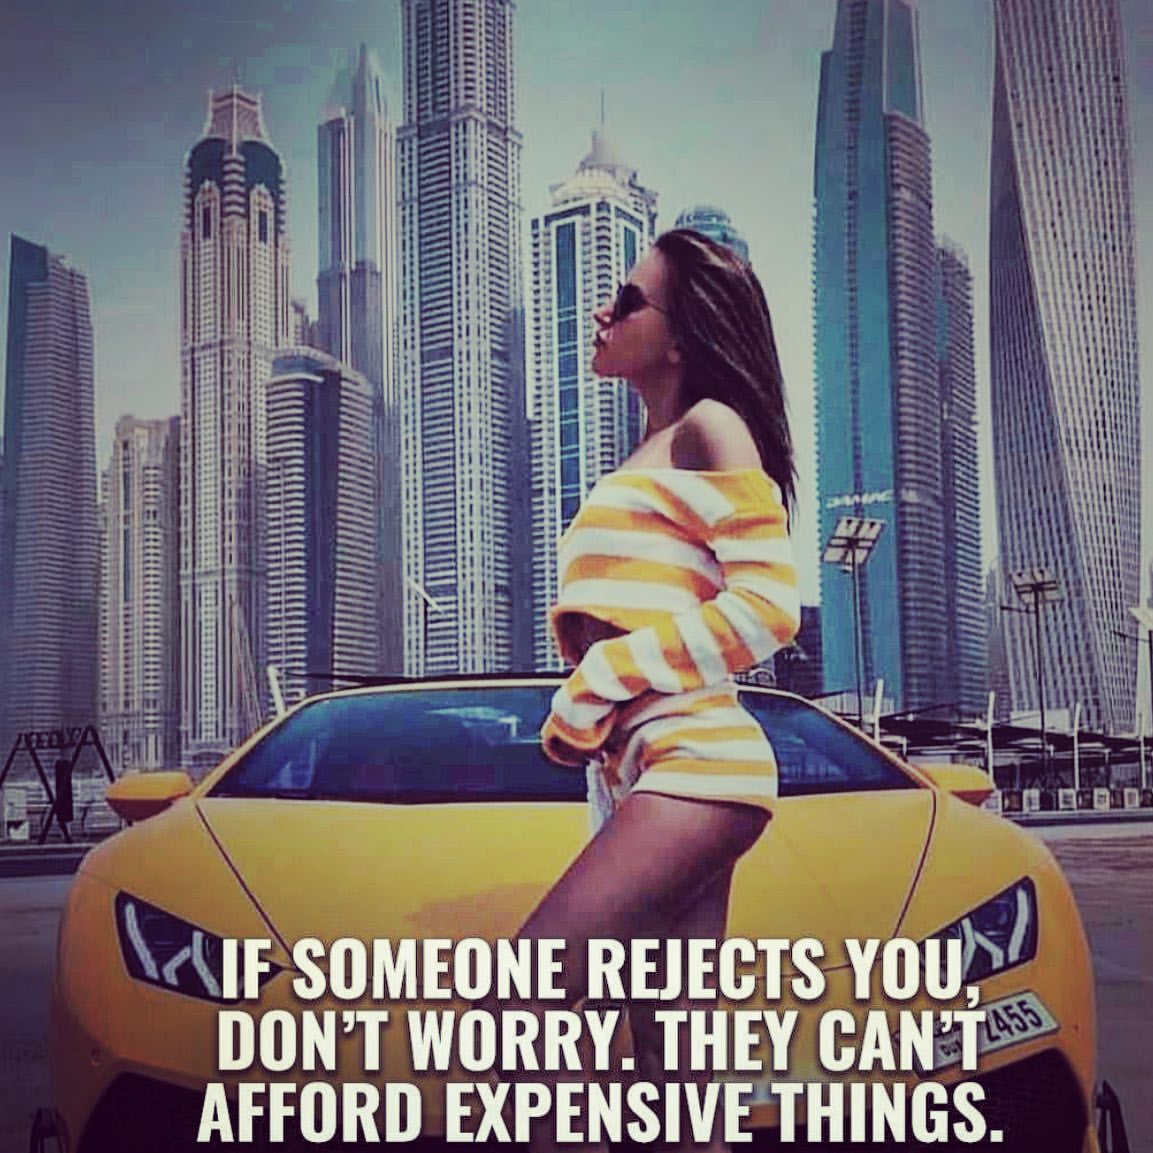 If someone rejects you, don't worry. They can't afford expensive things.